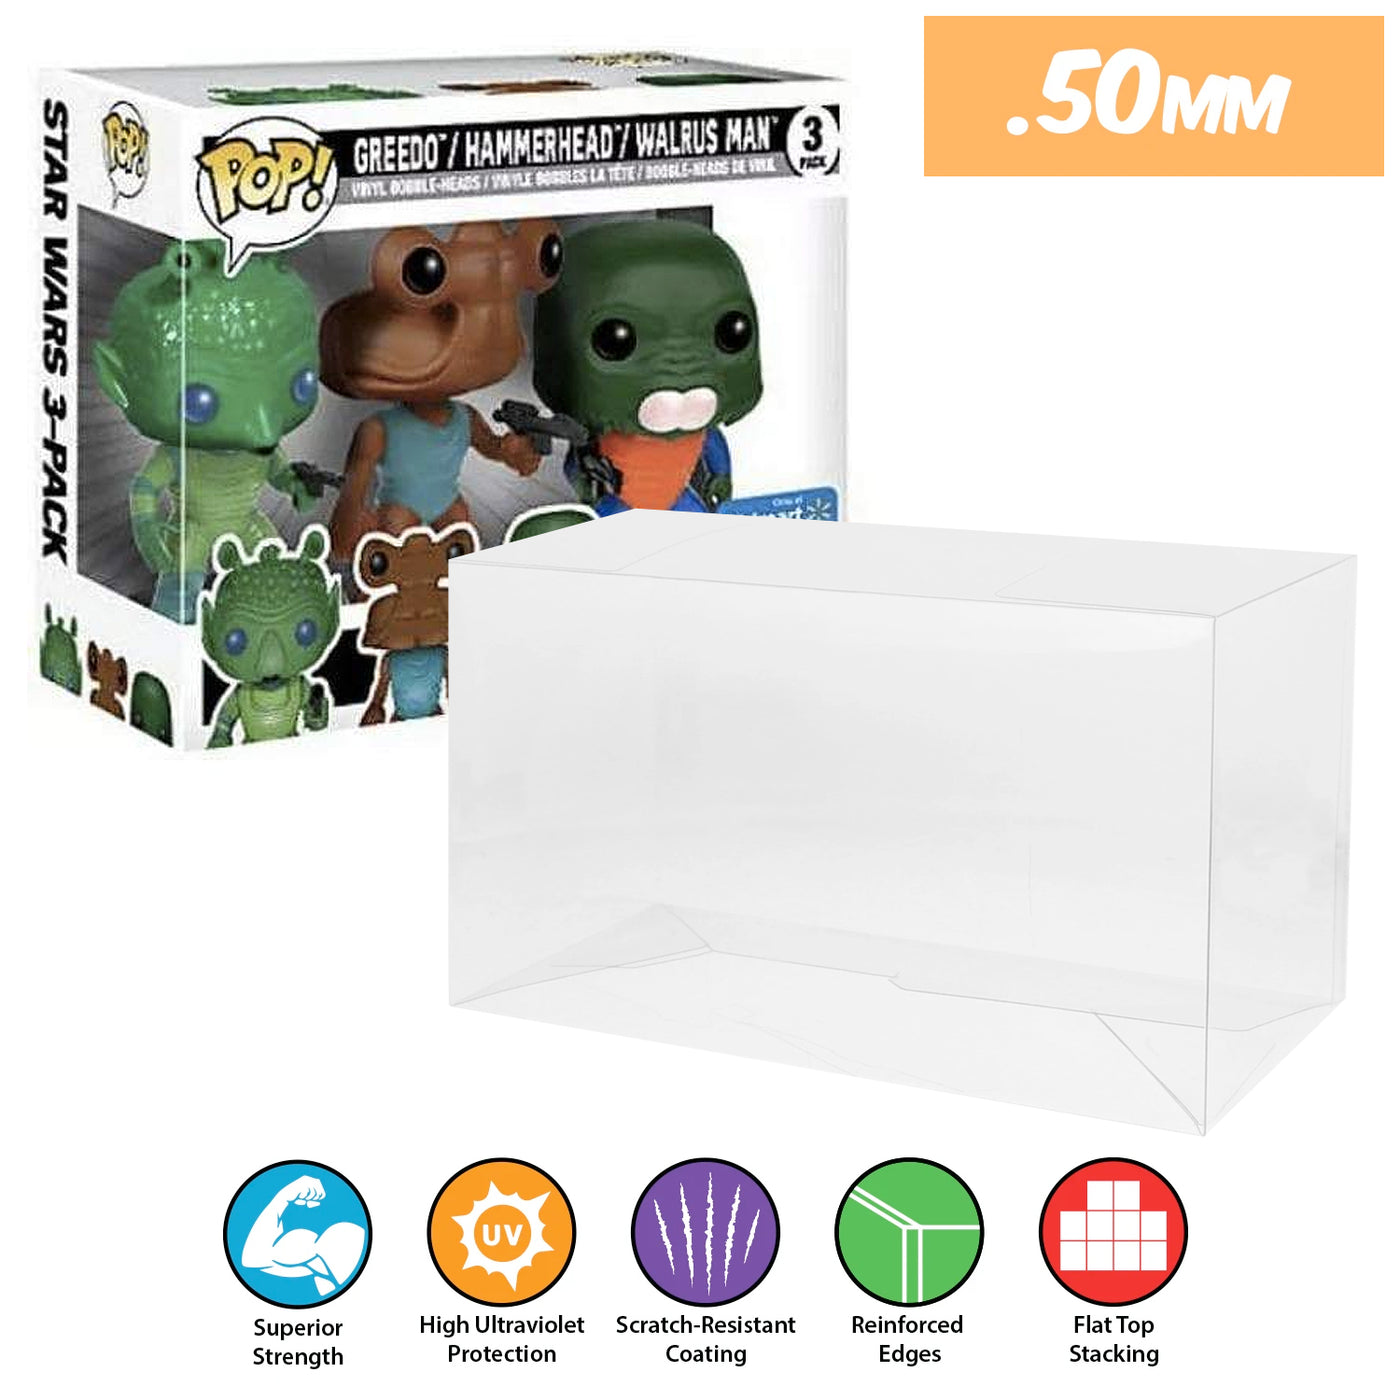 star wars greedo hammerhead walrus man 3 pack best funko pop protectors thick strong uv scratch flat top stack vinyl display geek plastic shield vaulted eco armor fits collect protect display case kollector protector